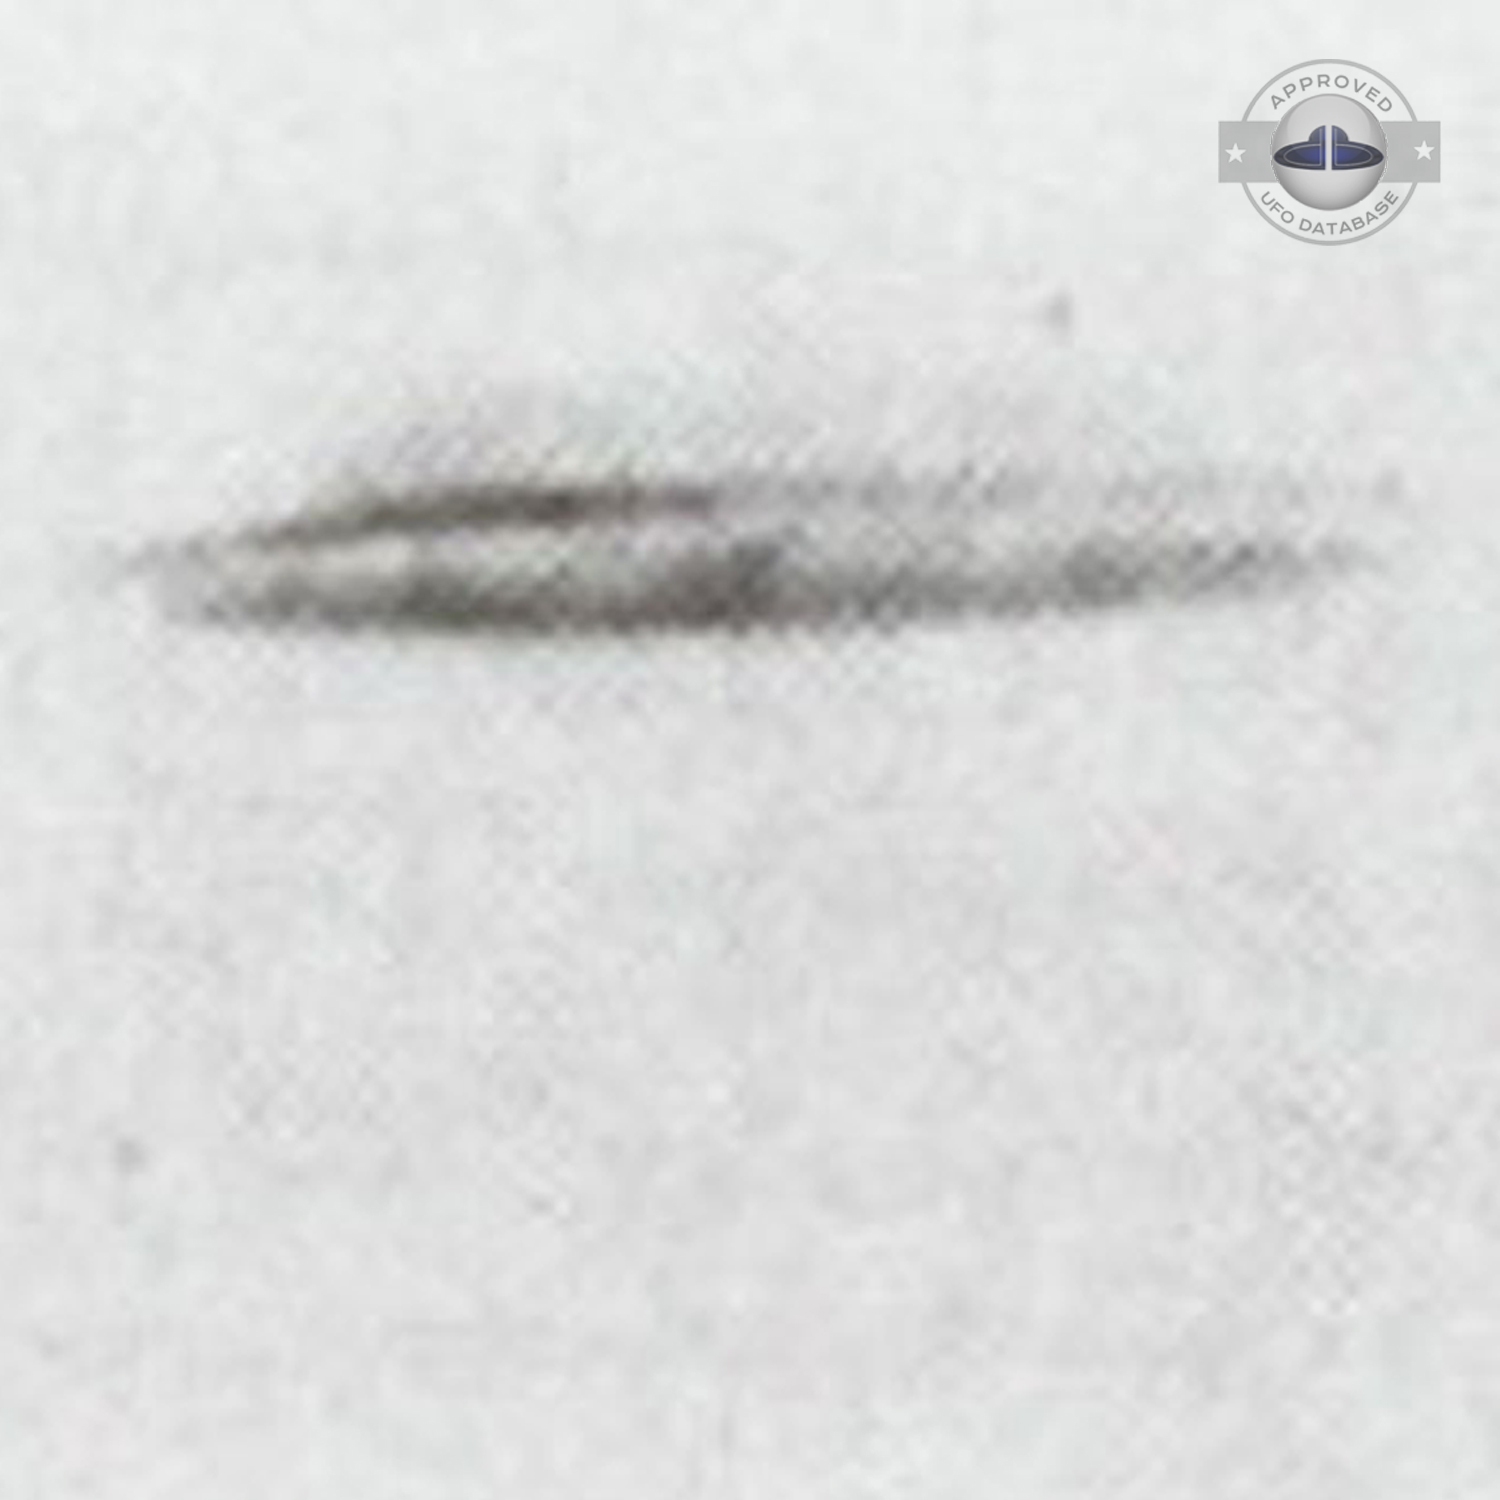 UFO over a fisherman and people in a canoe on a lake UFO Picture #45-5